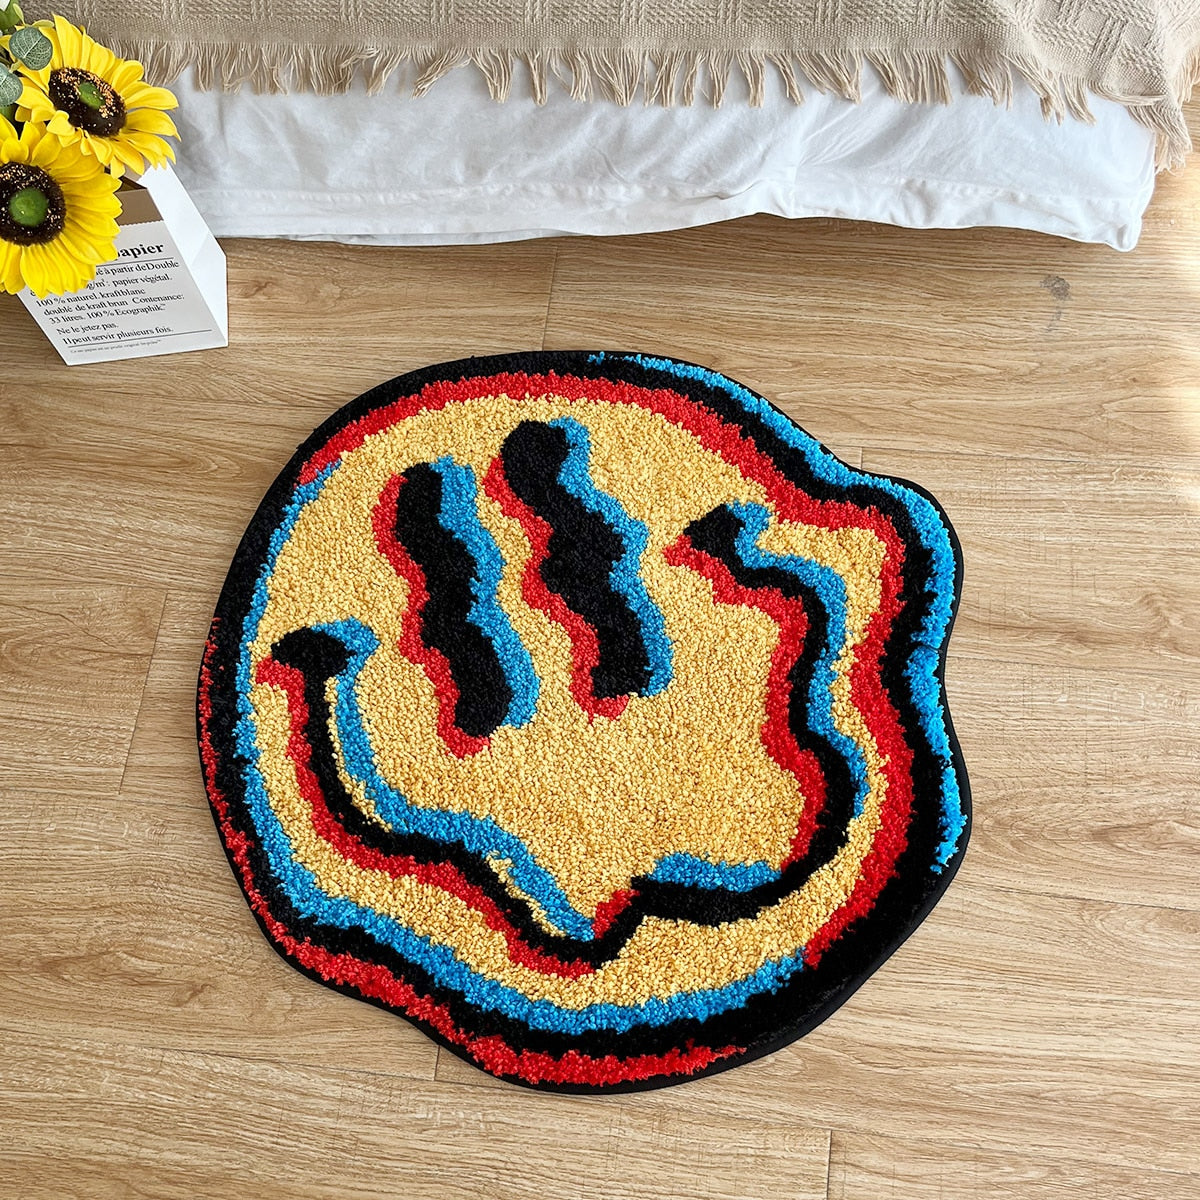 CORX Designs - Glitch Smiling Face Rug - Review